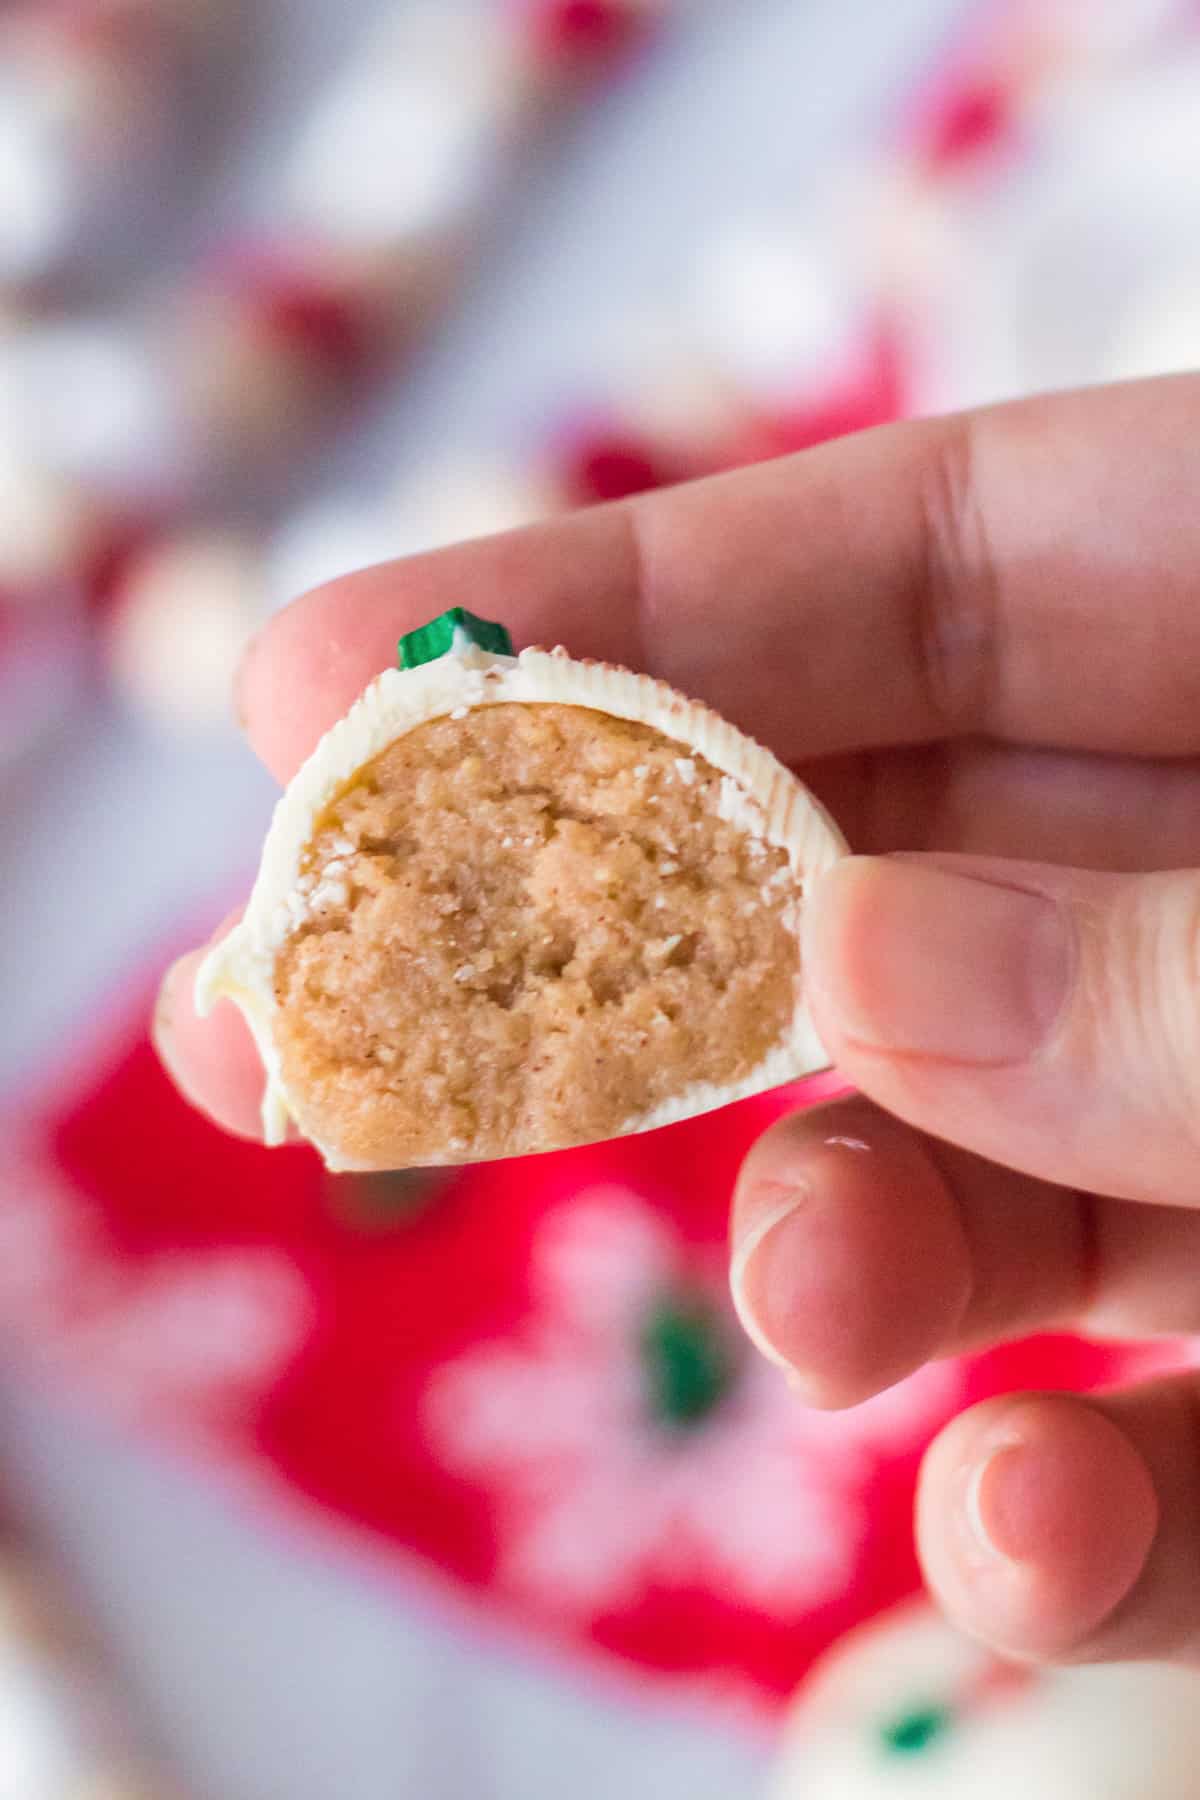 Hand holding snickerdoodle cookie dough truffle cut in half to show golden cookie mixture inside.